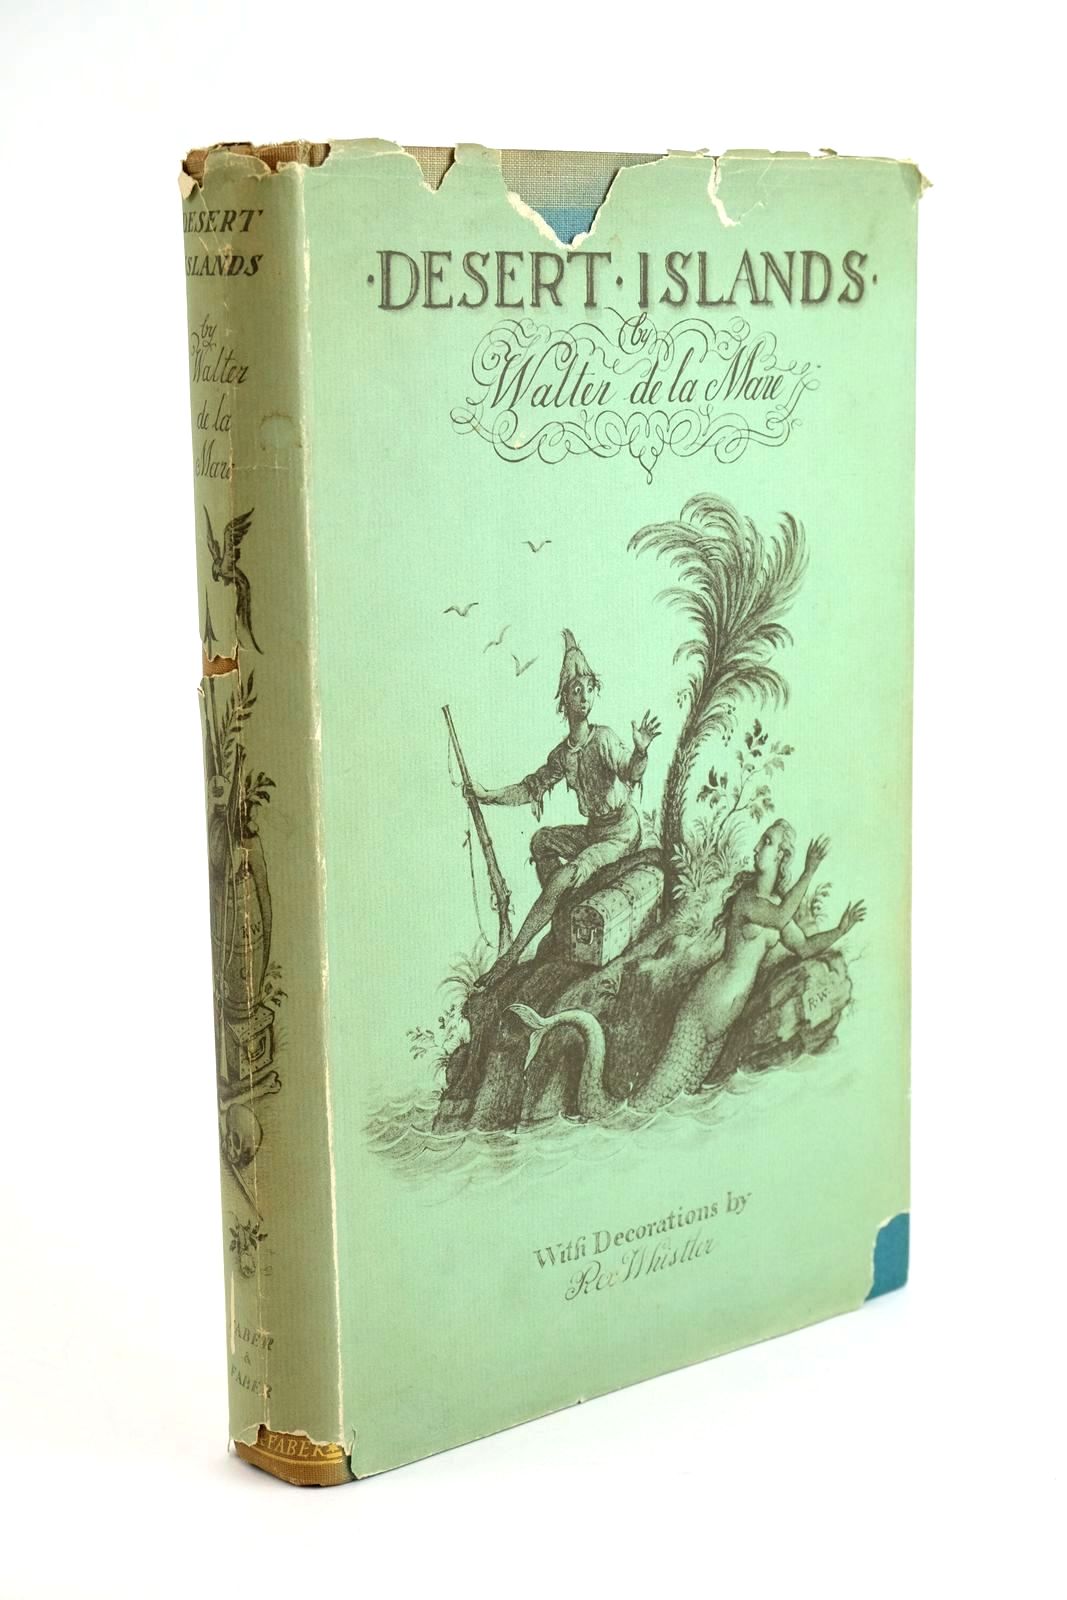 Photo of DESERT ISLANDS AND ROBINSON CRUSOE written by De La Mare, Walter illustrated by Whistler, Rex published by Faber &amp; Faber (STOCK CODE: 1323483)  for sale by Stella & Rose's Books